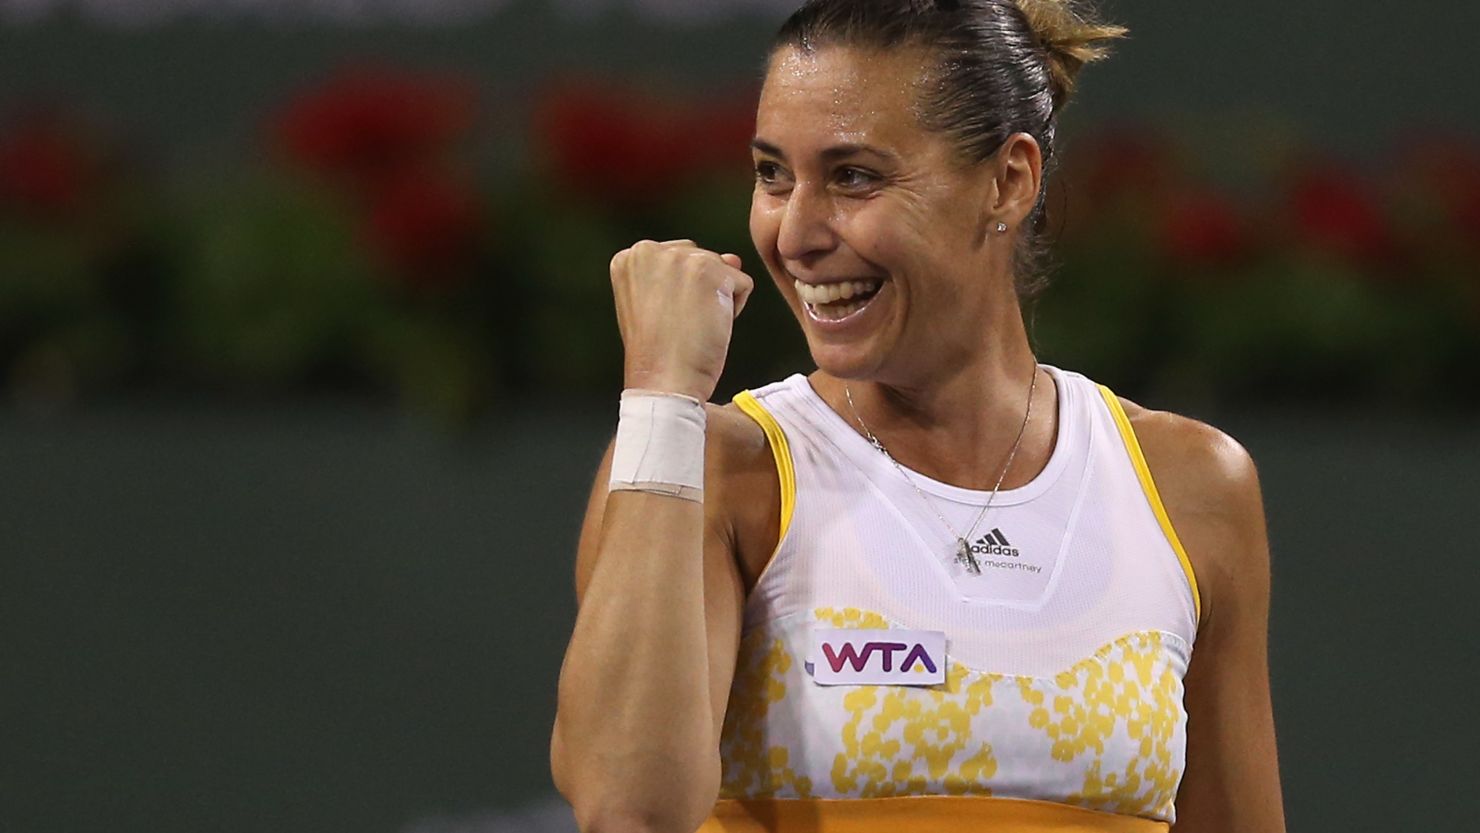 Italian tennis player Flavia Pennetta celebrates her victory over China's world No. 2 Li Na at Indian Wells Tennis Garden.